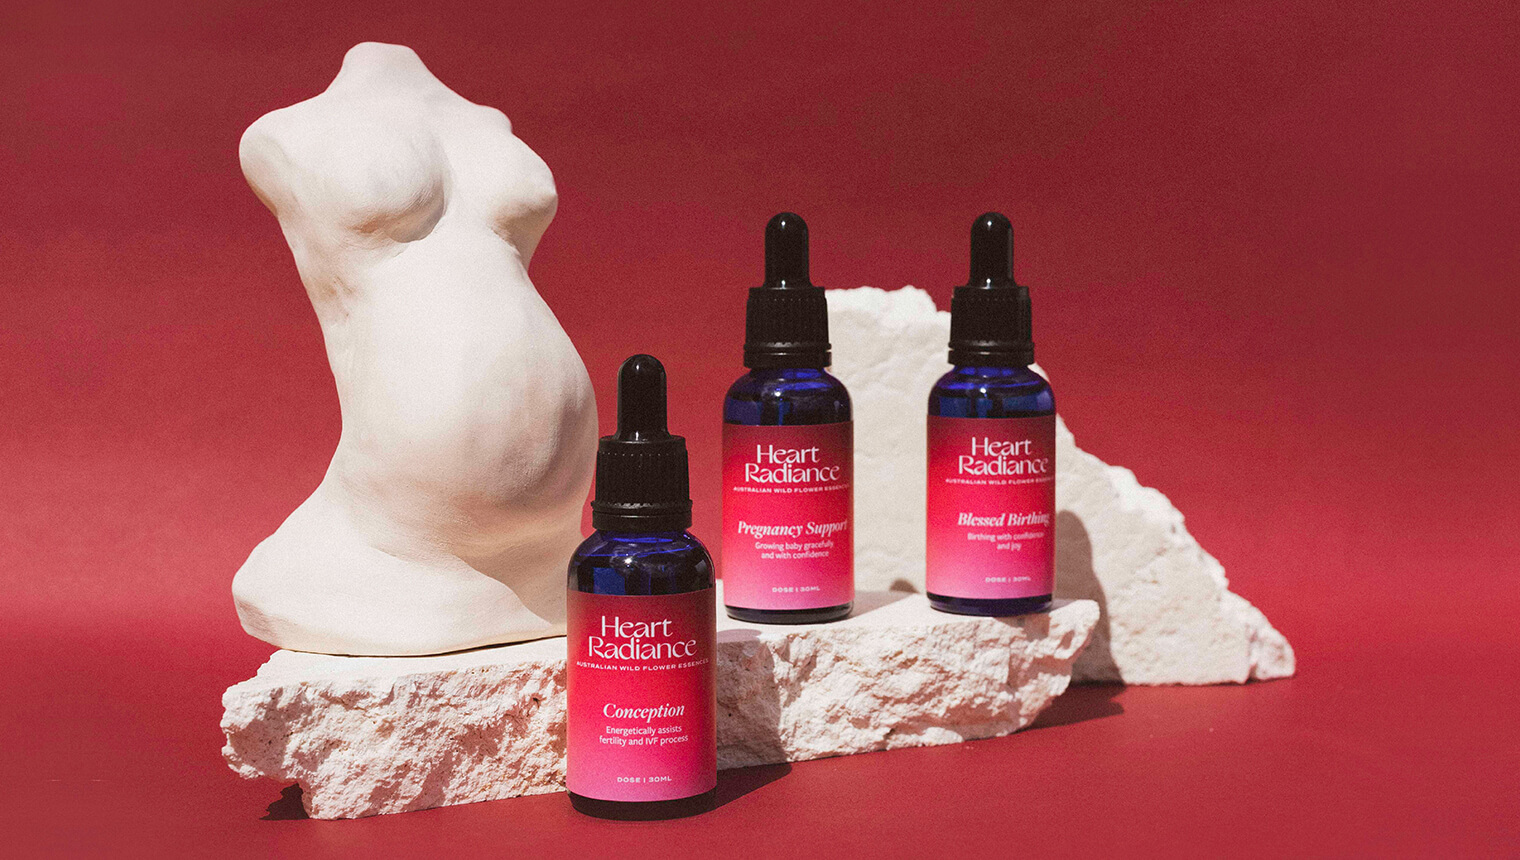 Thumbnail for the brand identity case study of HeartRadience. The image shows the pink-labelled dropper bottles on white stones in front of a pink background.